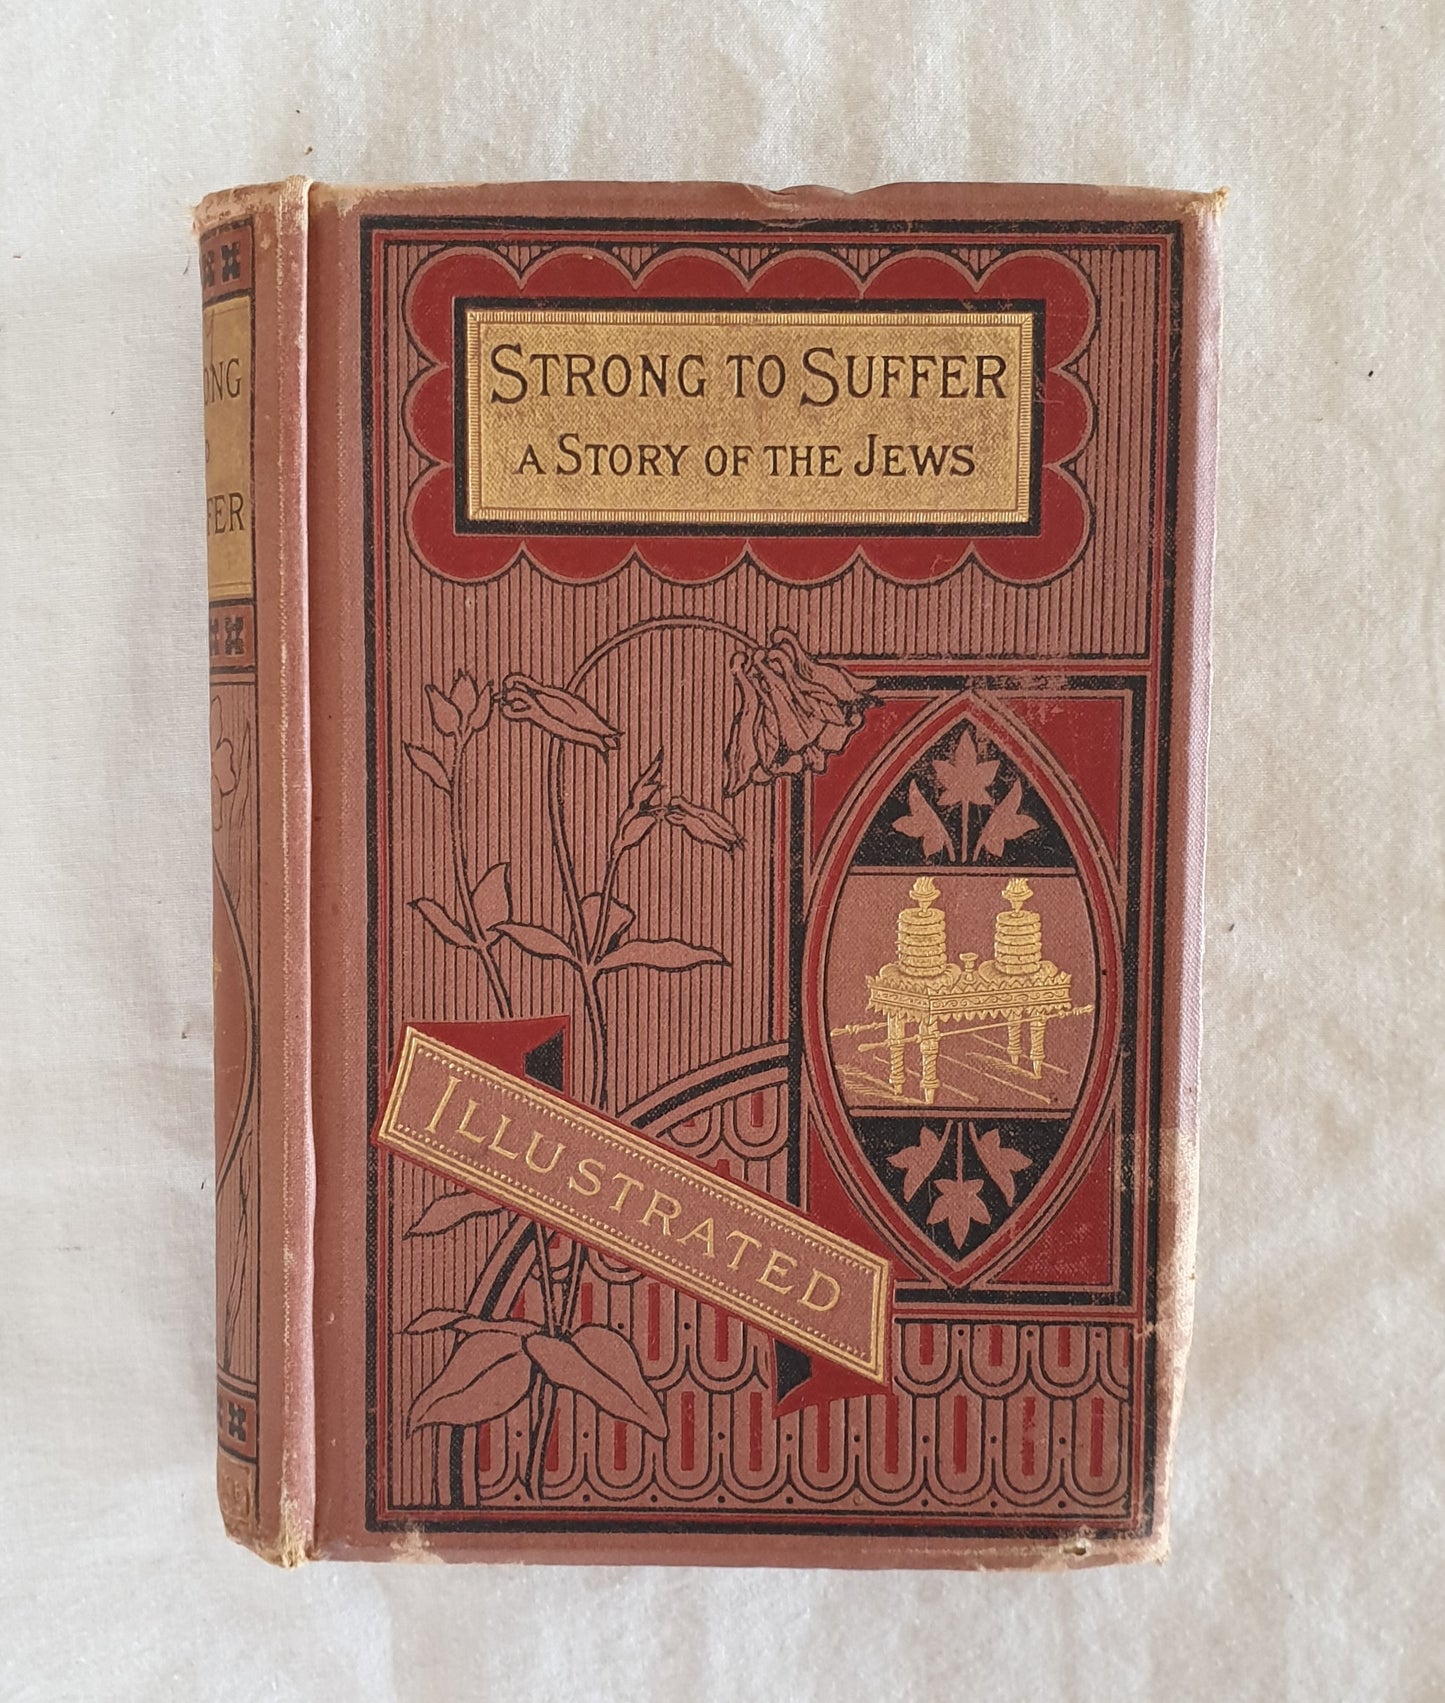 Strong To Suffer by E. Wynne